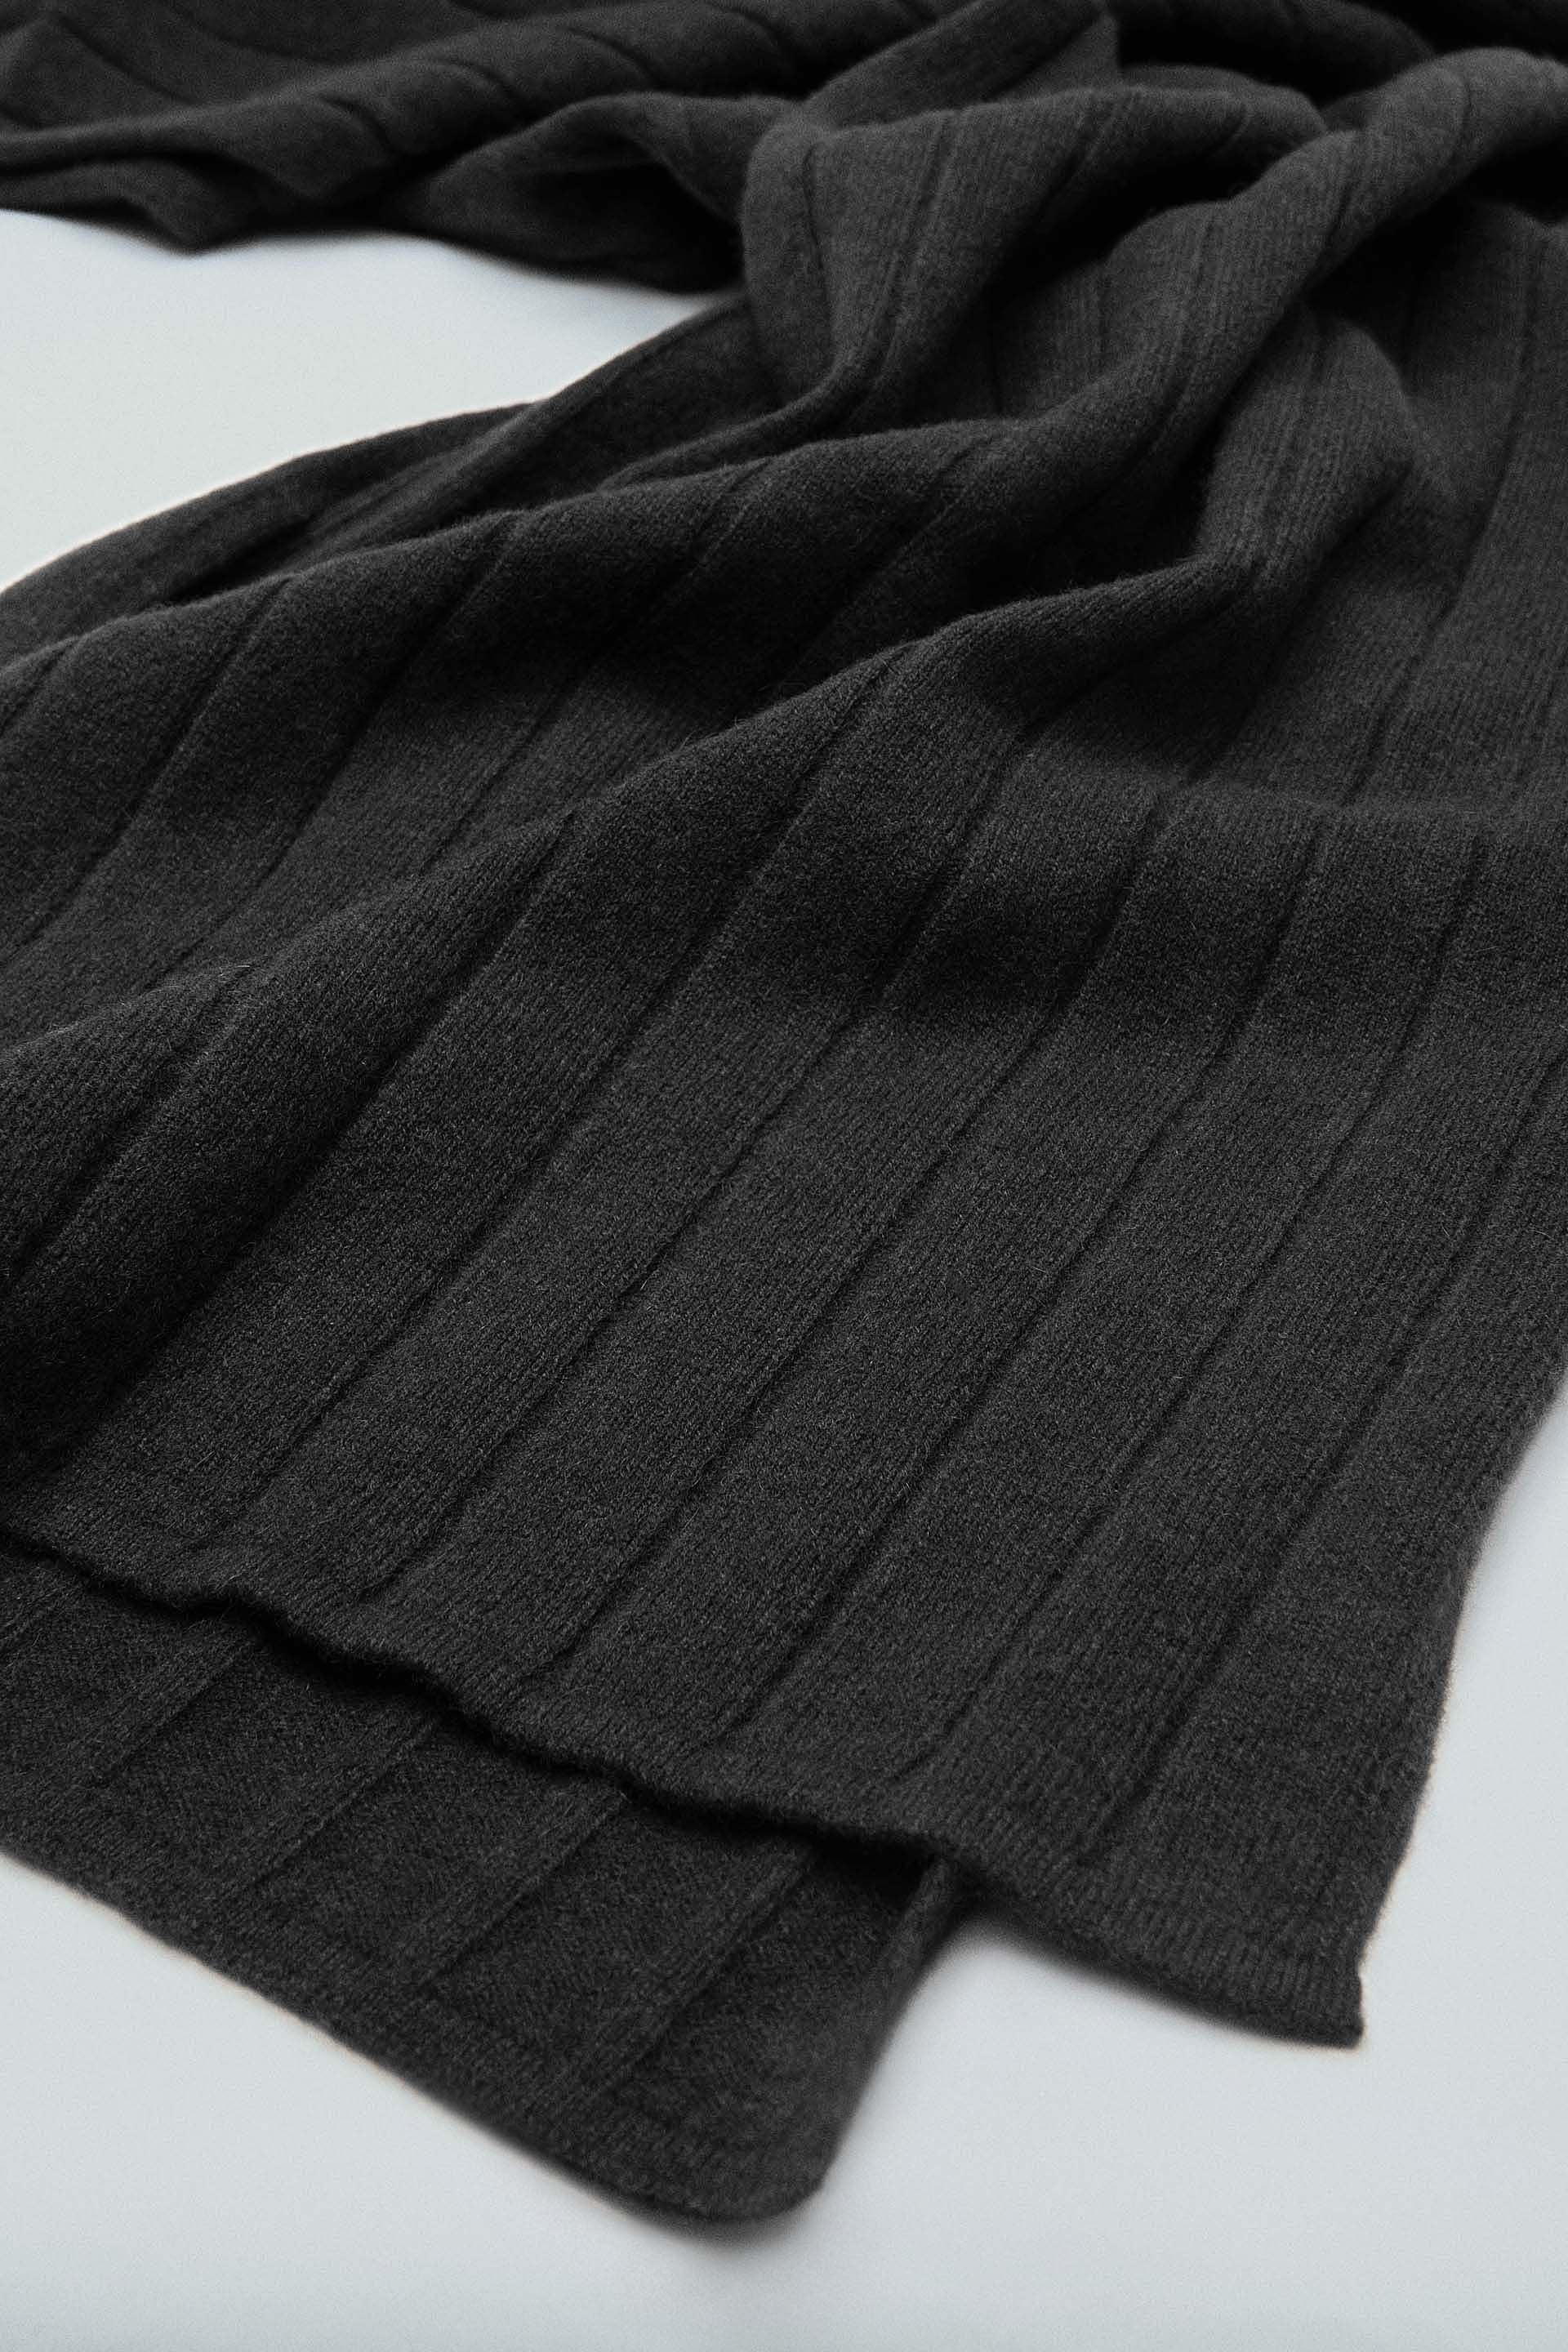 Charcoal grey scarf cashmere